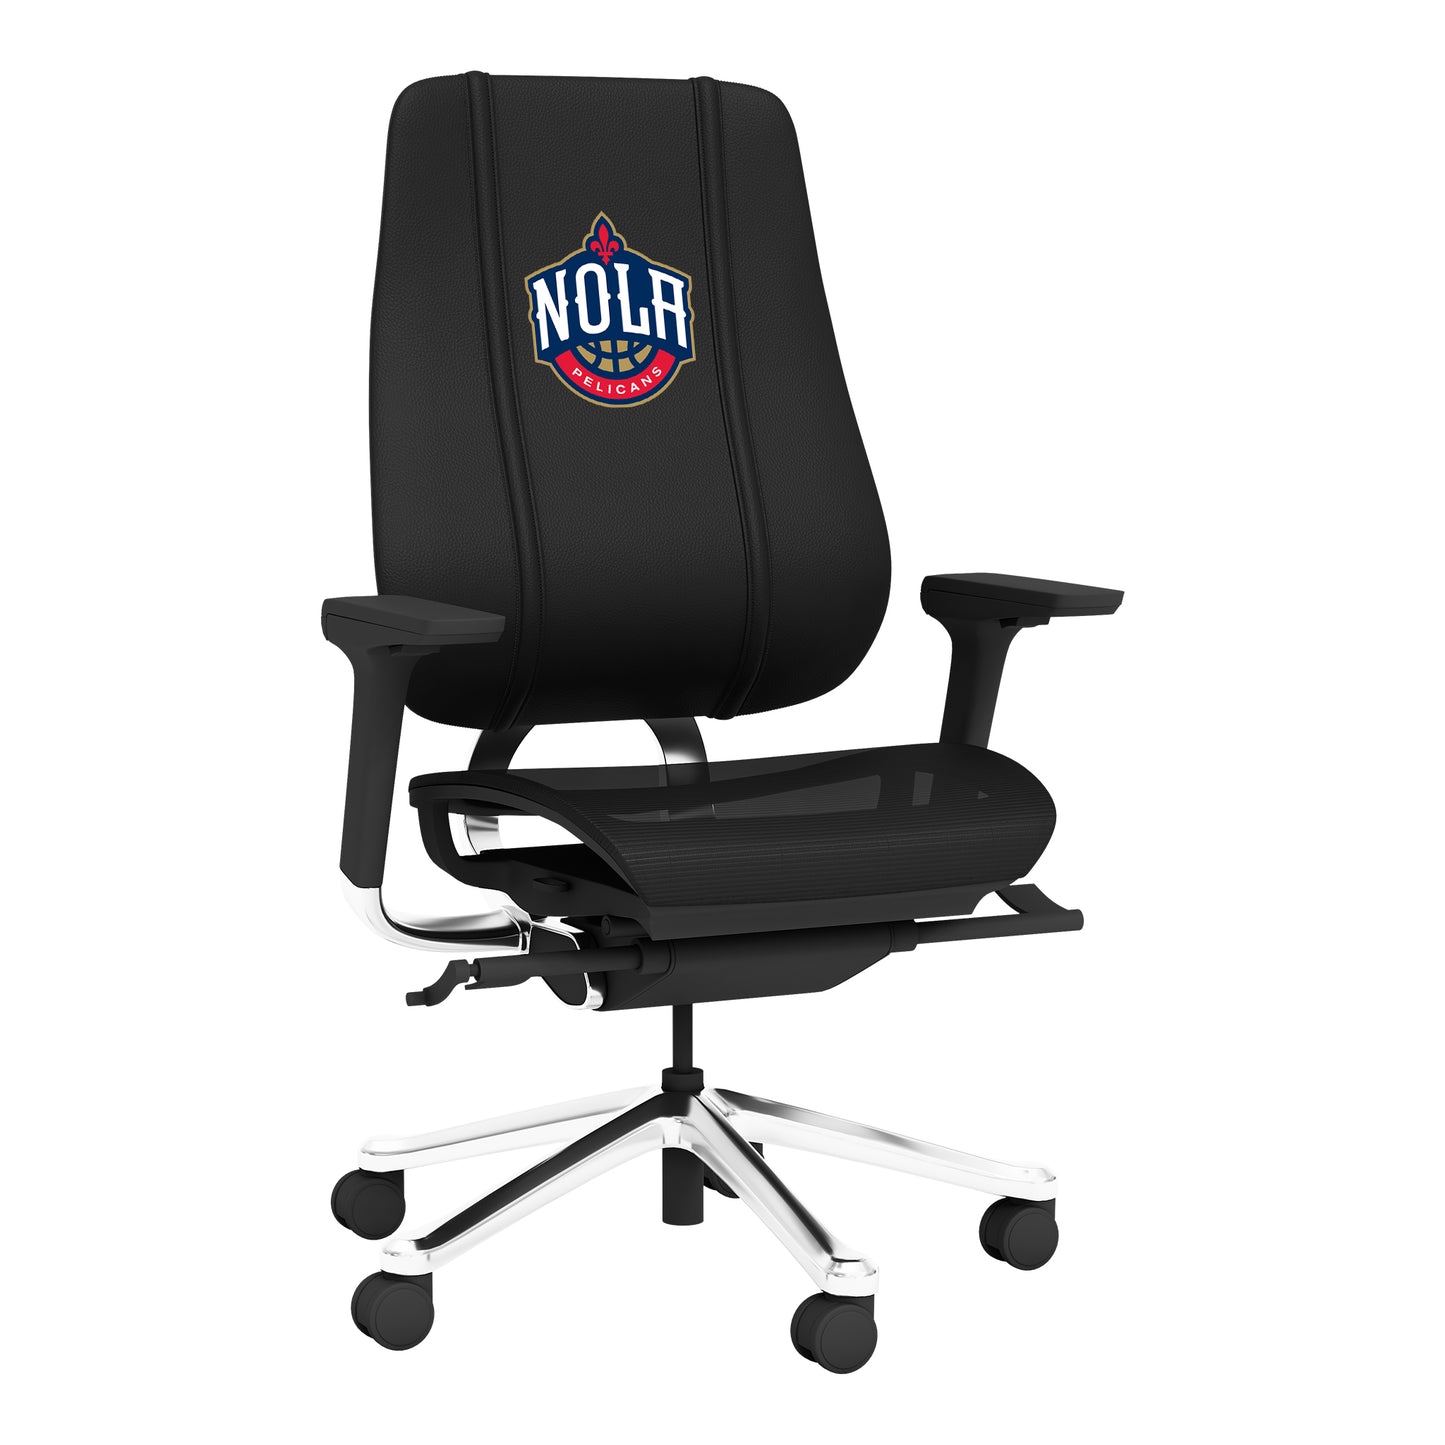 PhantomX Mesh Gaming Chair with New Orleans Pelicans NOLA